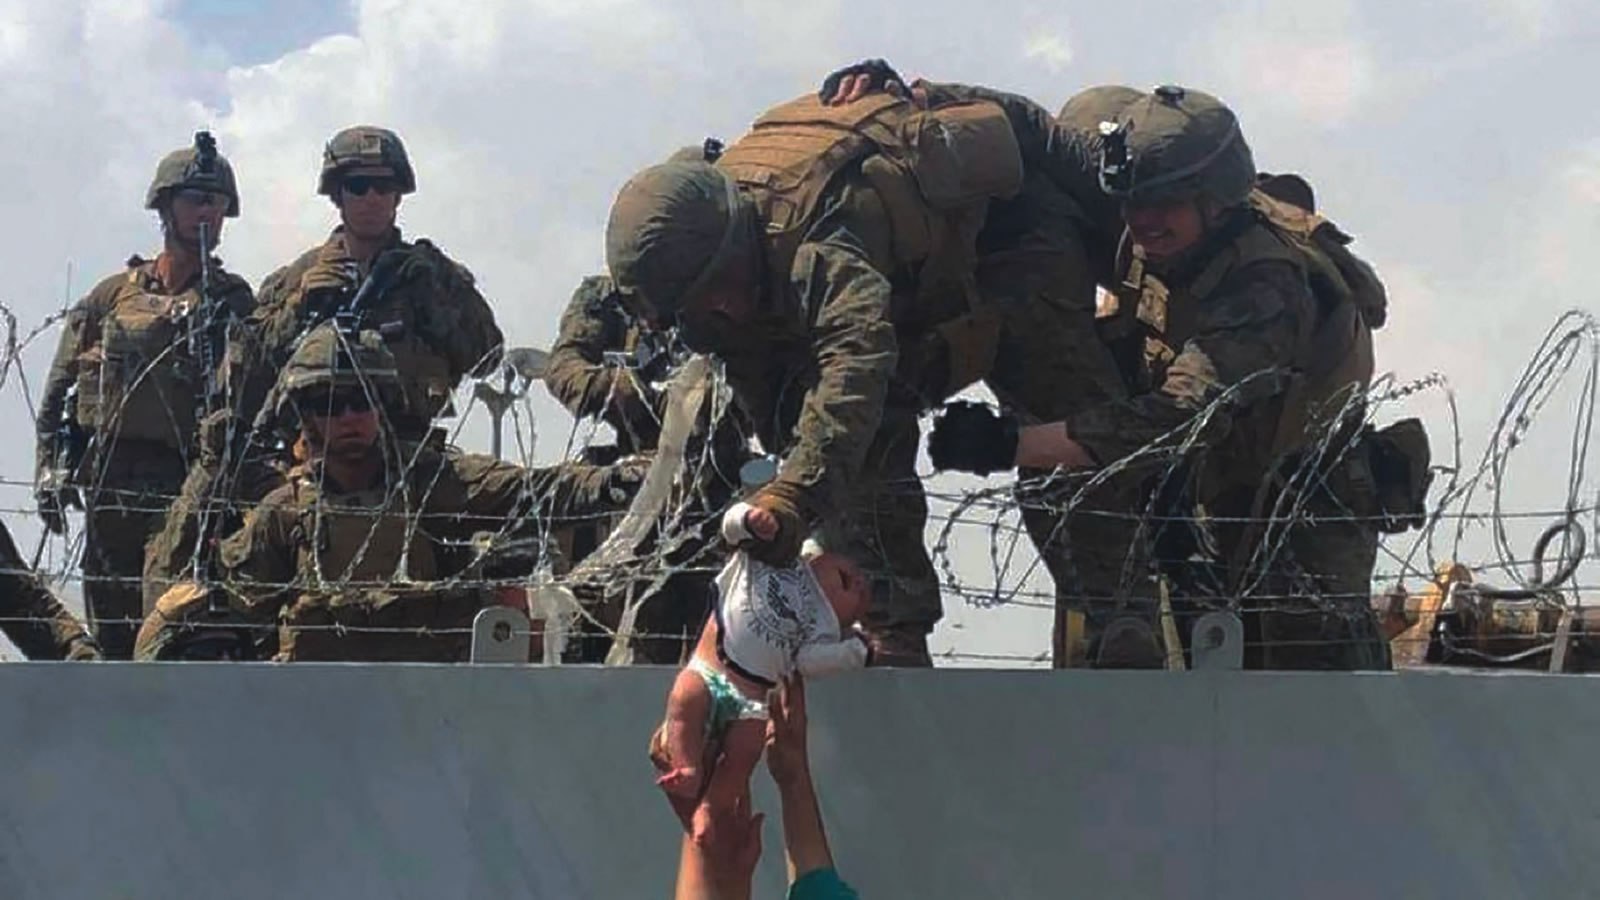 soldiers save a baby over concertina wire